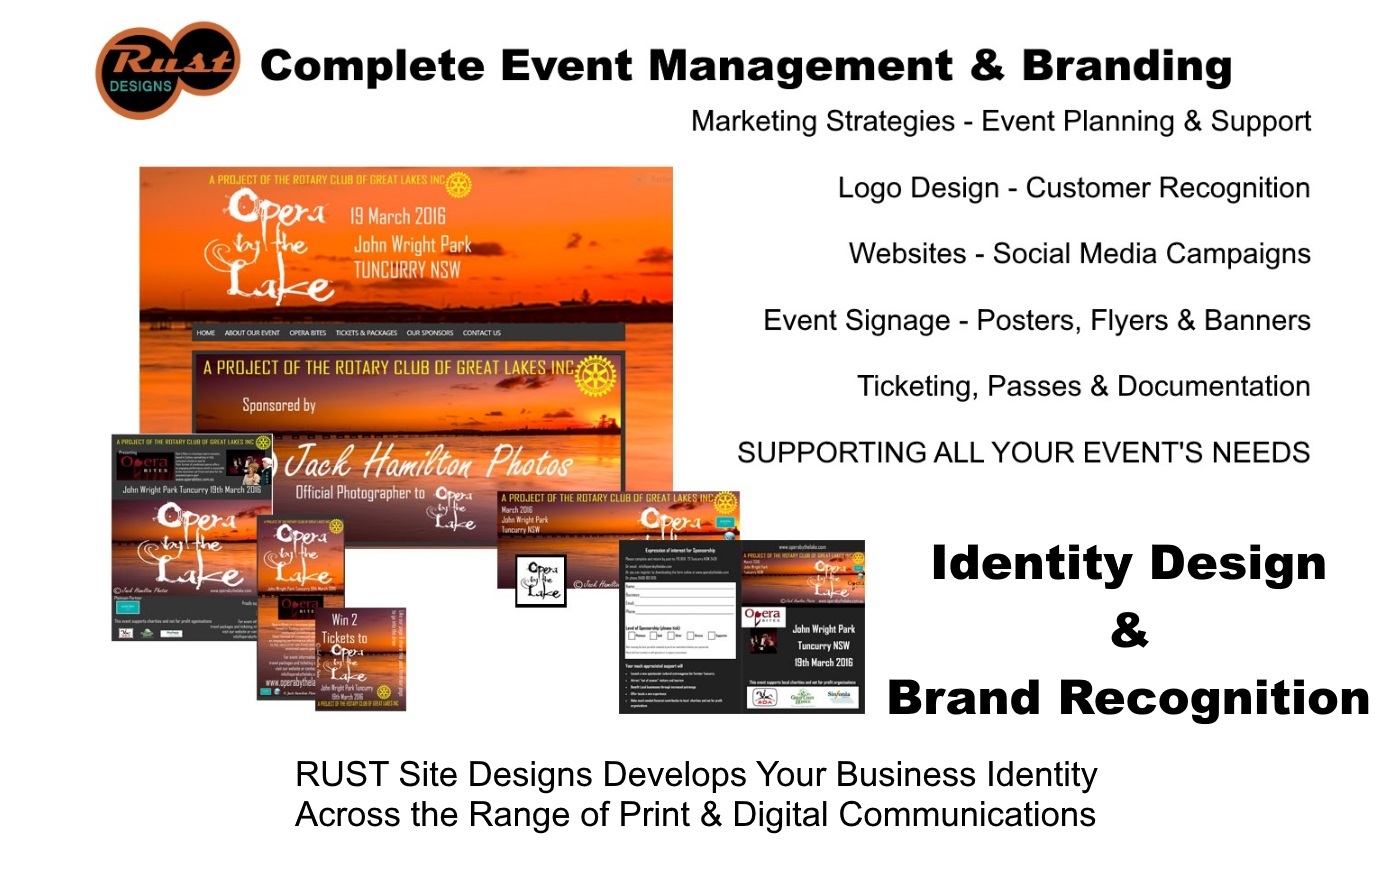 Print Layout Design, Graphic Design, Signage, Advertising Campaigns, Styling by RUST Site Designs